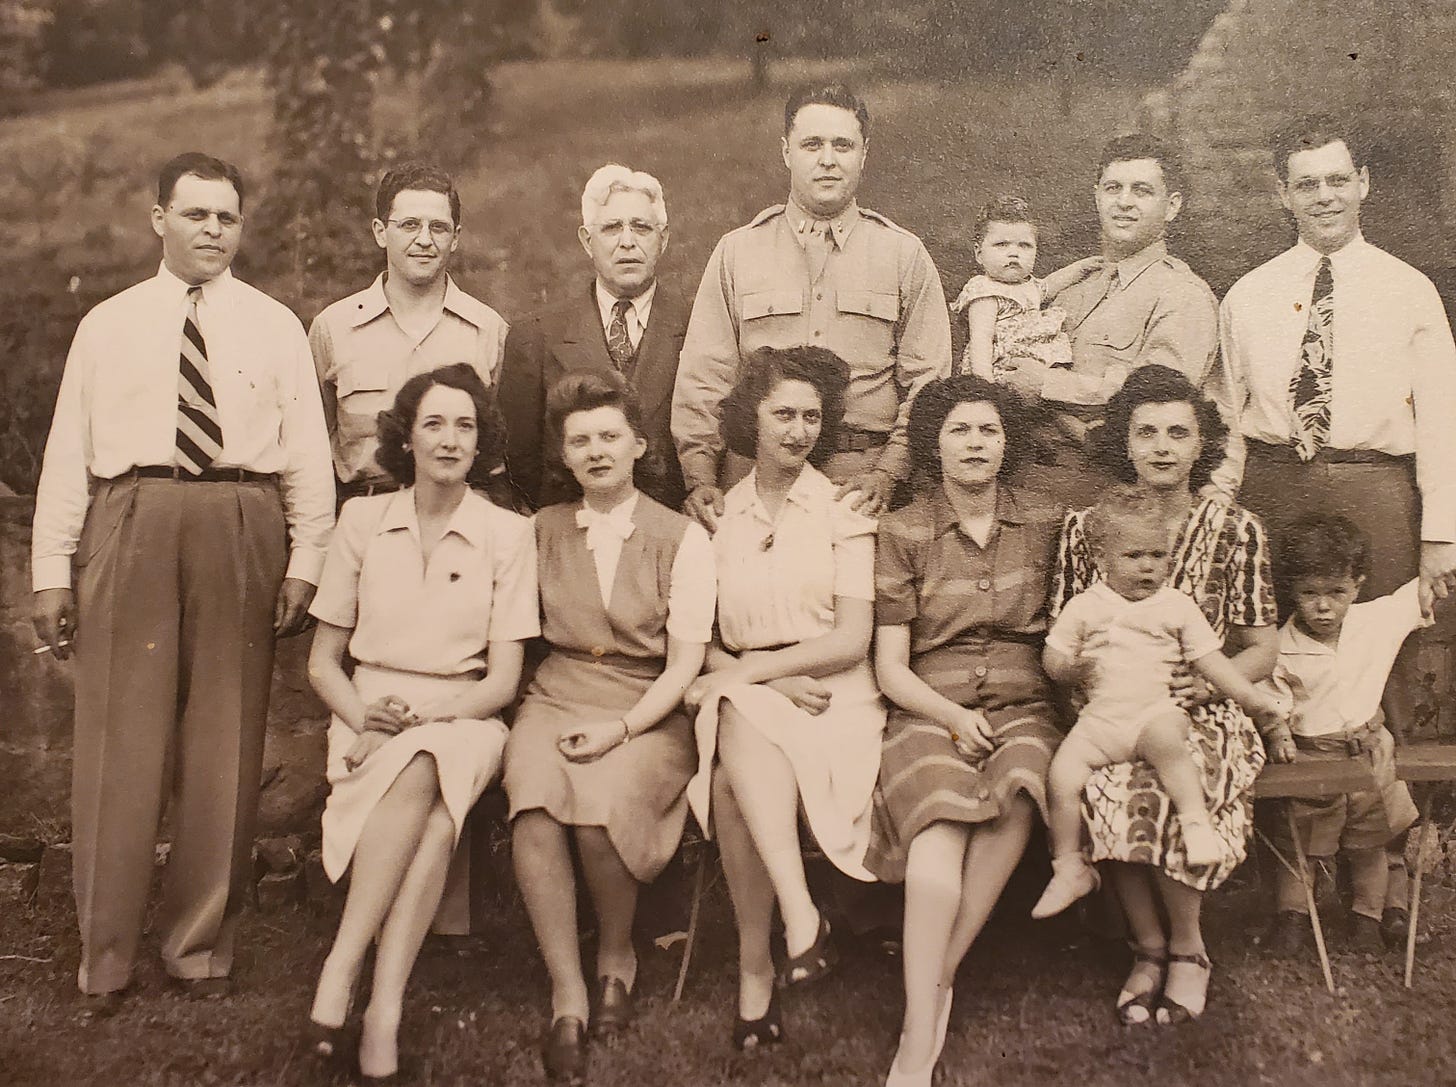 A family portrait with the men standing in the back and the women seated in front of them.